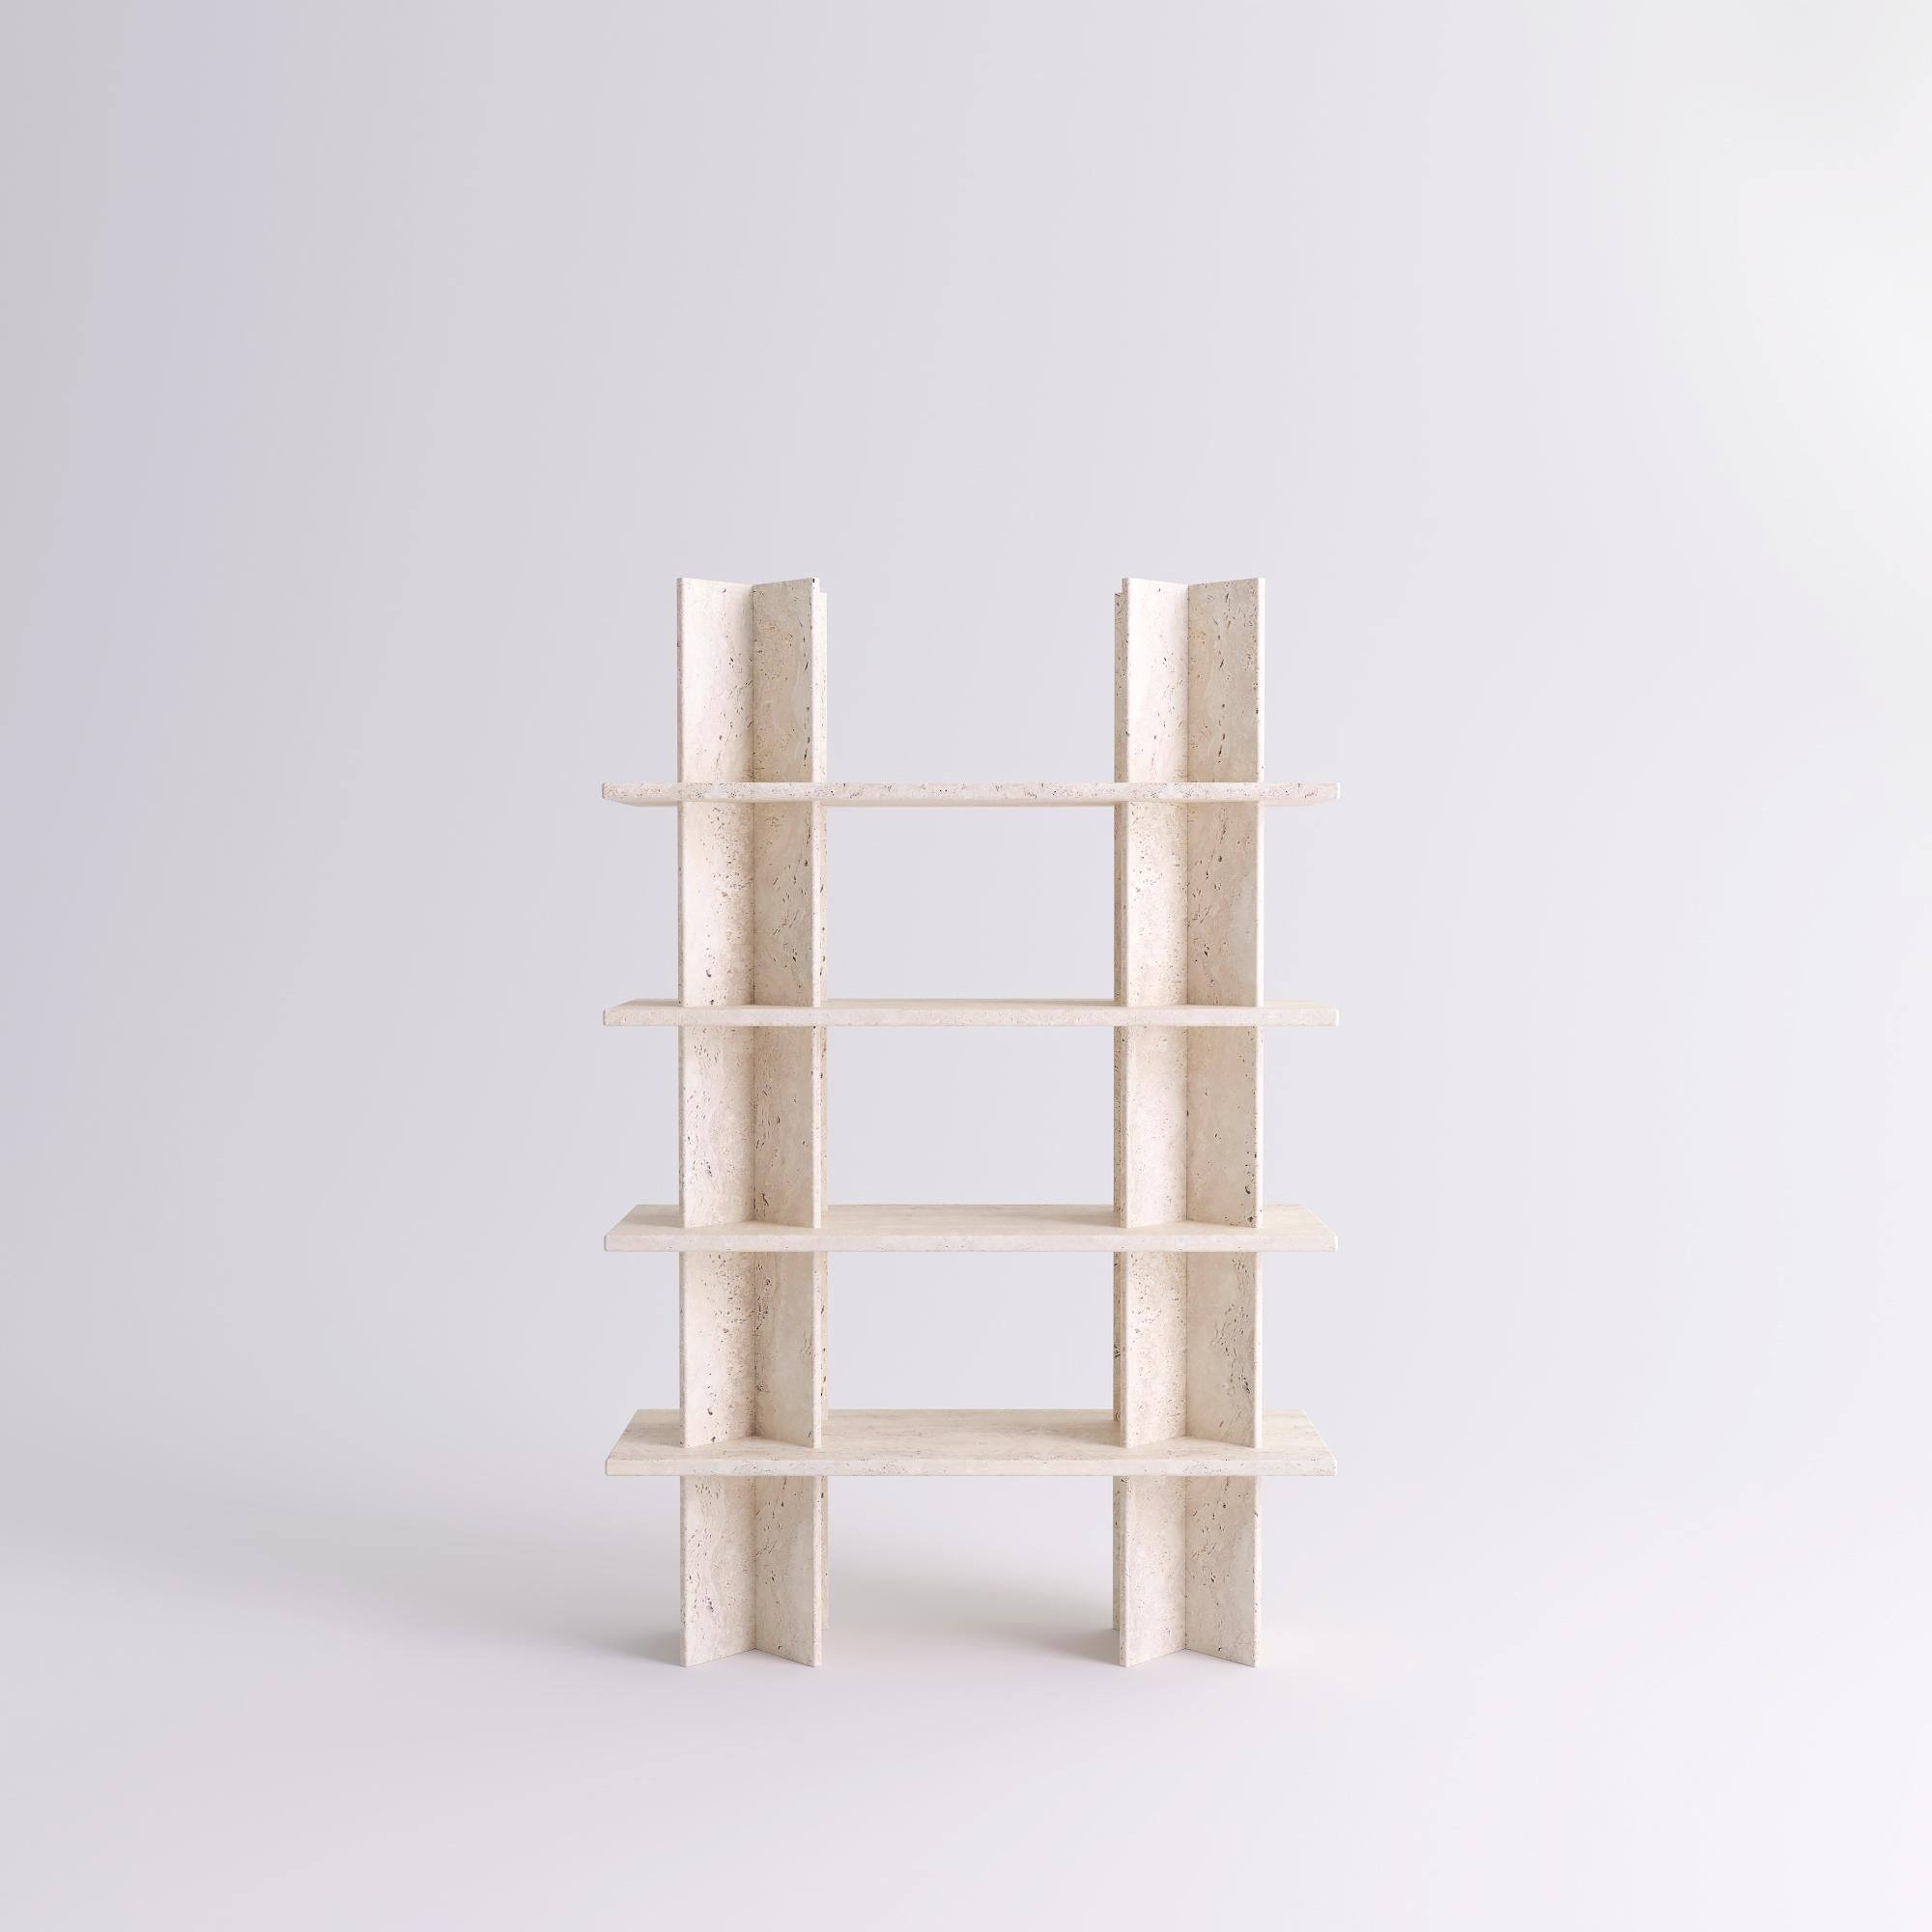 French Monument Travertine Shelves by Mathieu Girard & Gauthier Pouillart For Sale